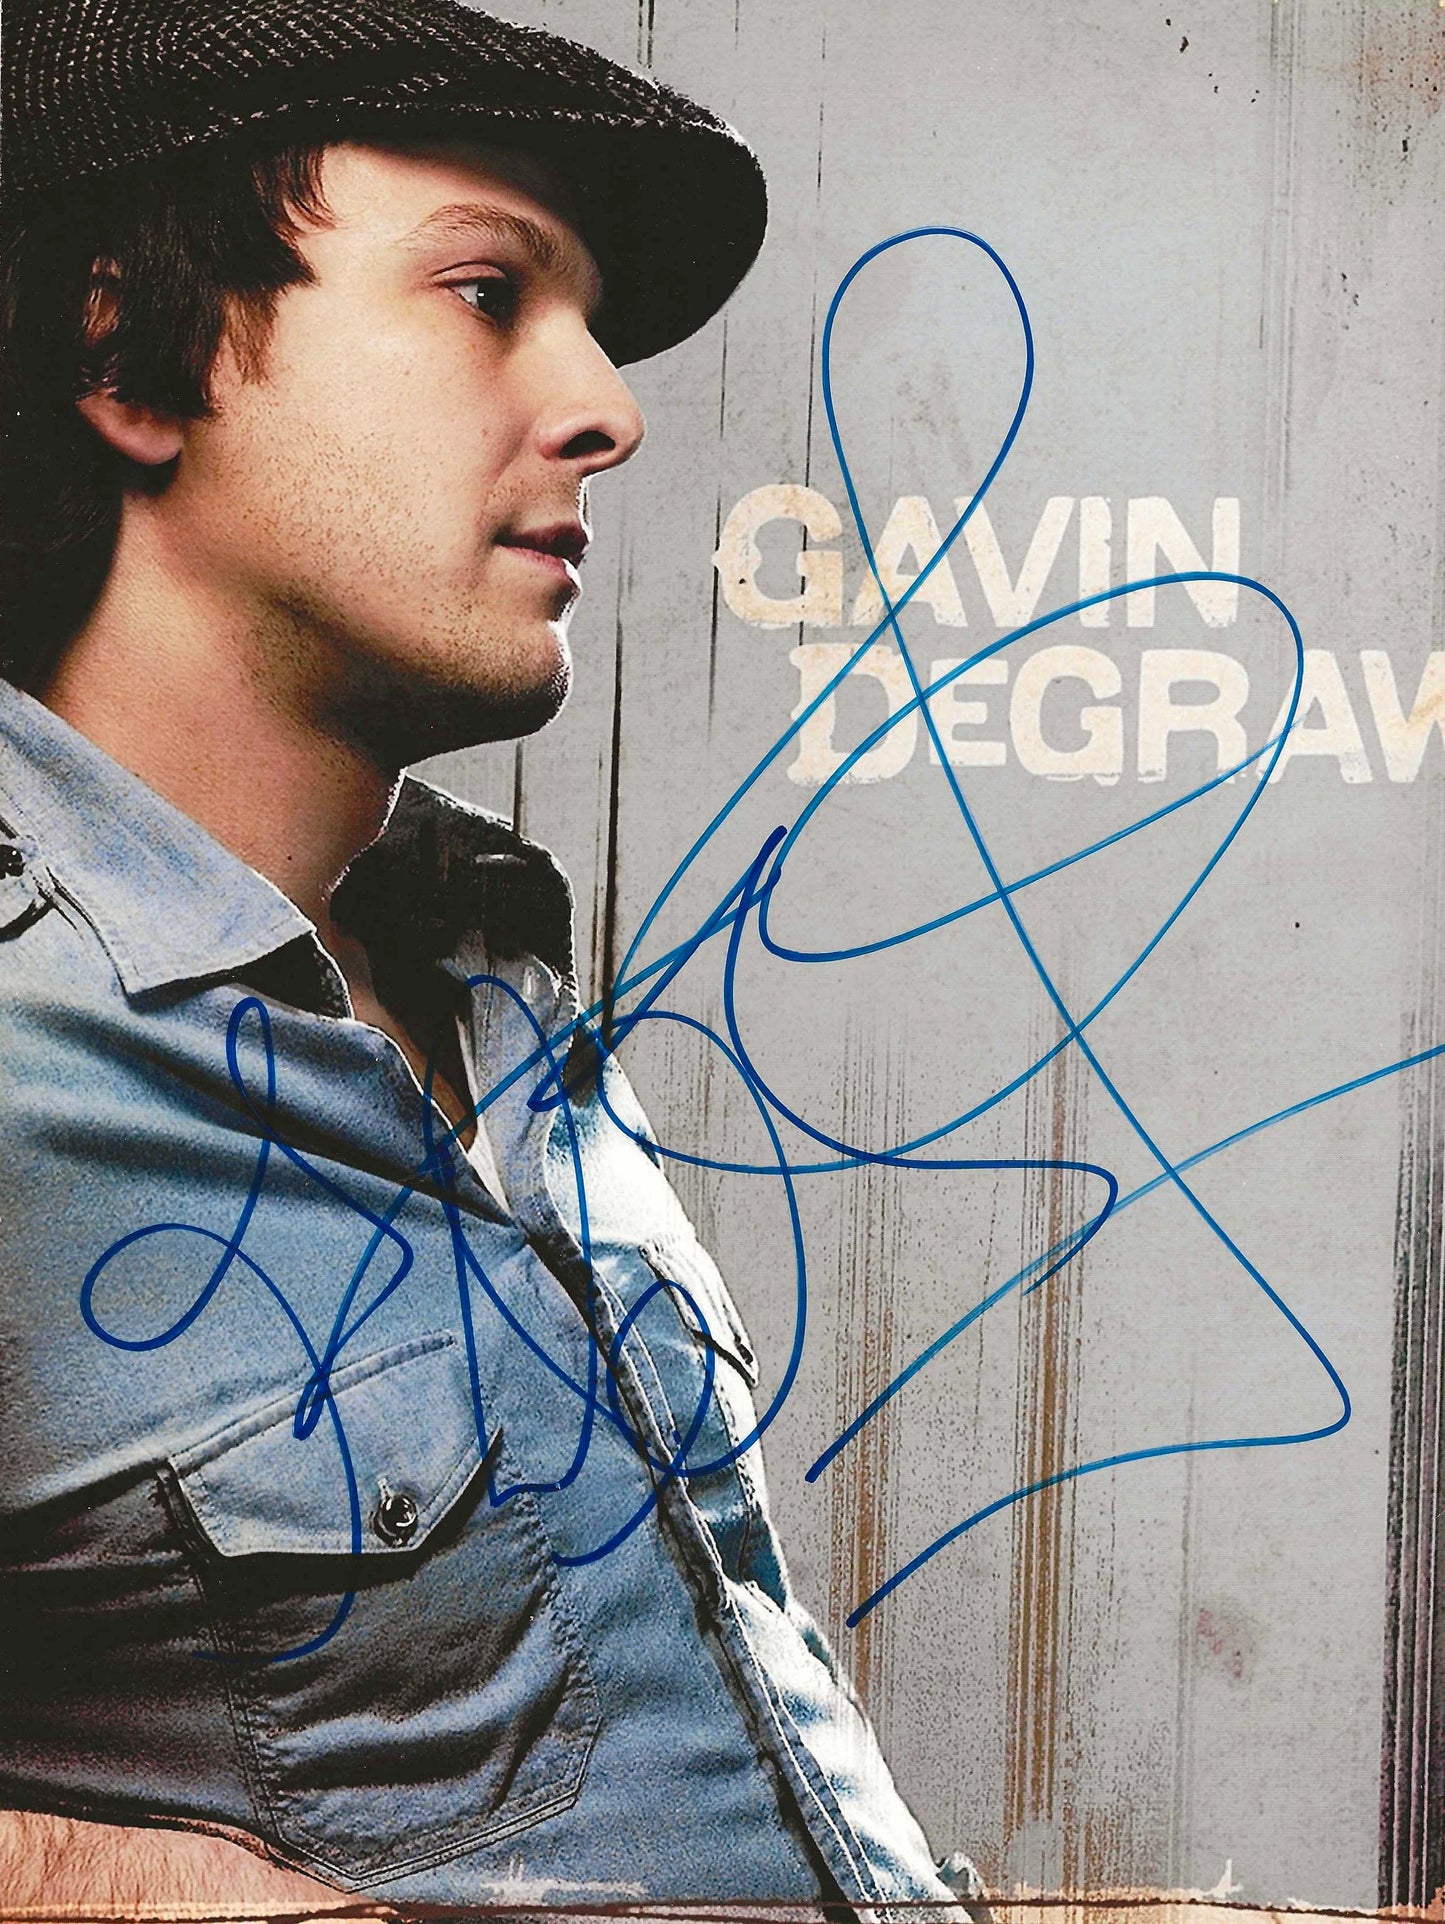 Gavin Degraw Autographed Signed 8.5X11 Photo Elite Promotions & Graphz Authentication